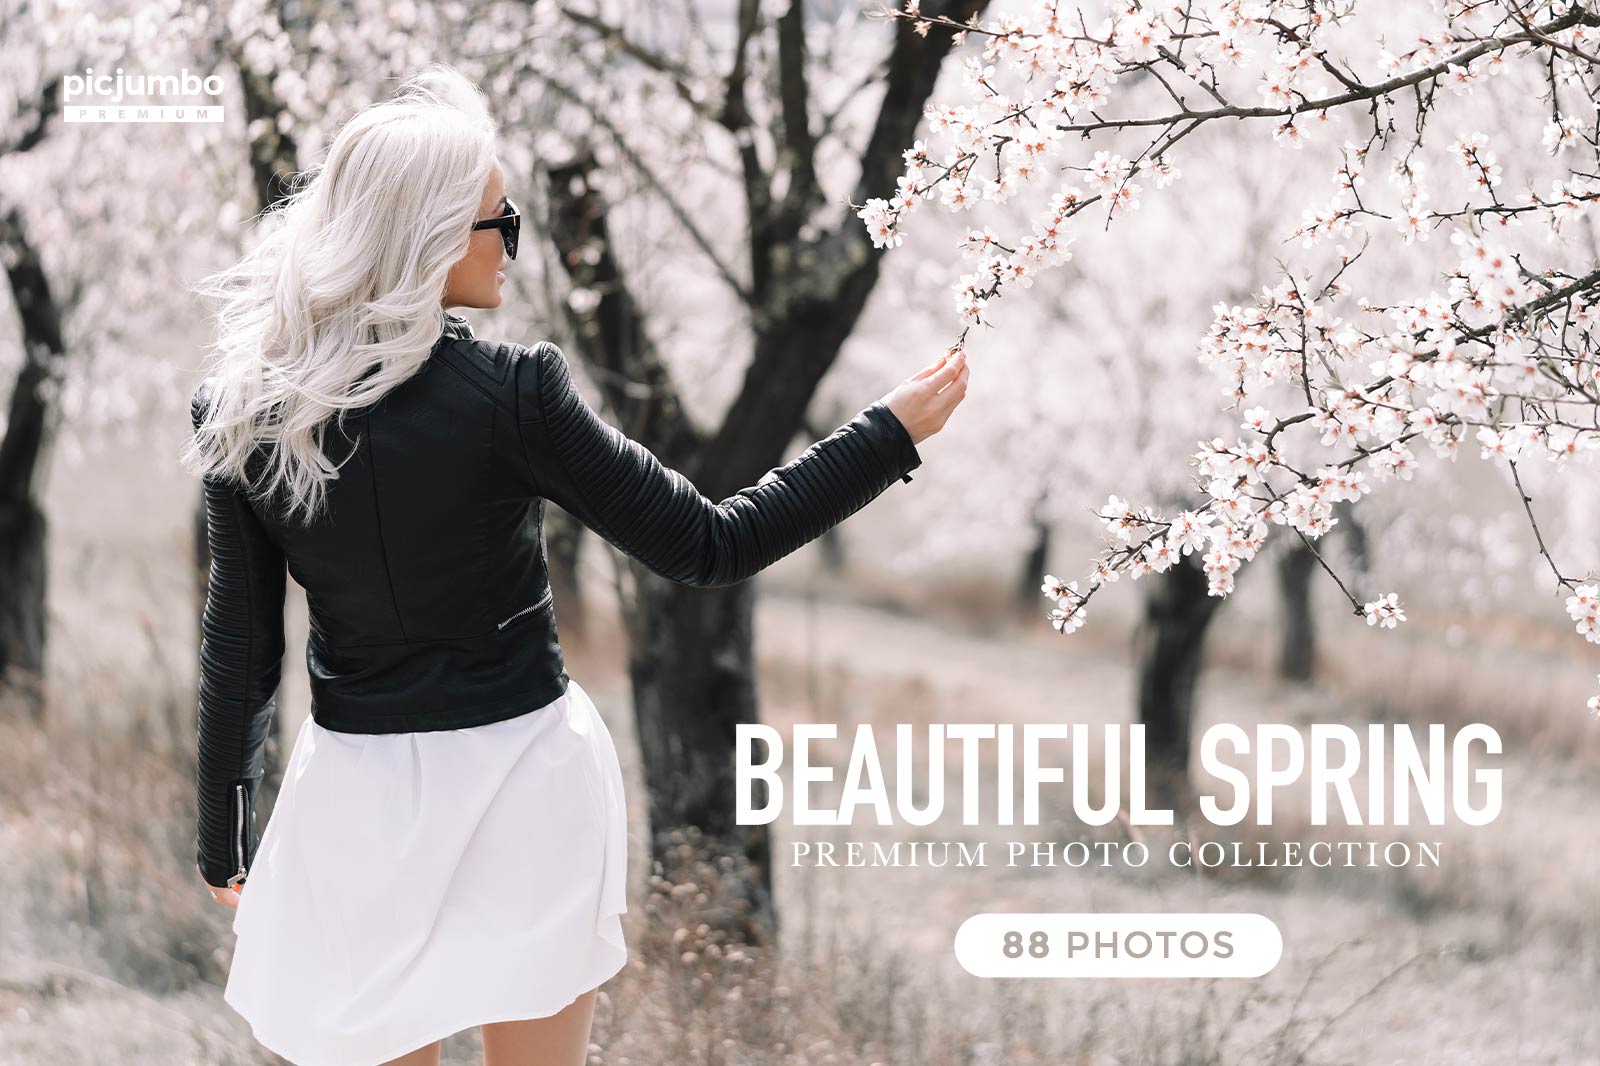 Beautiful Spring Stock Photo Collection